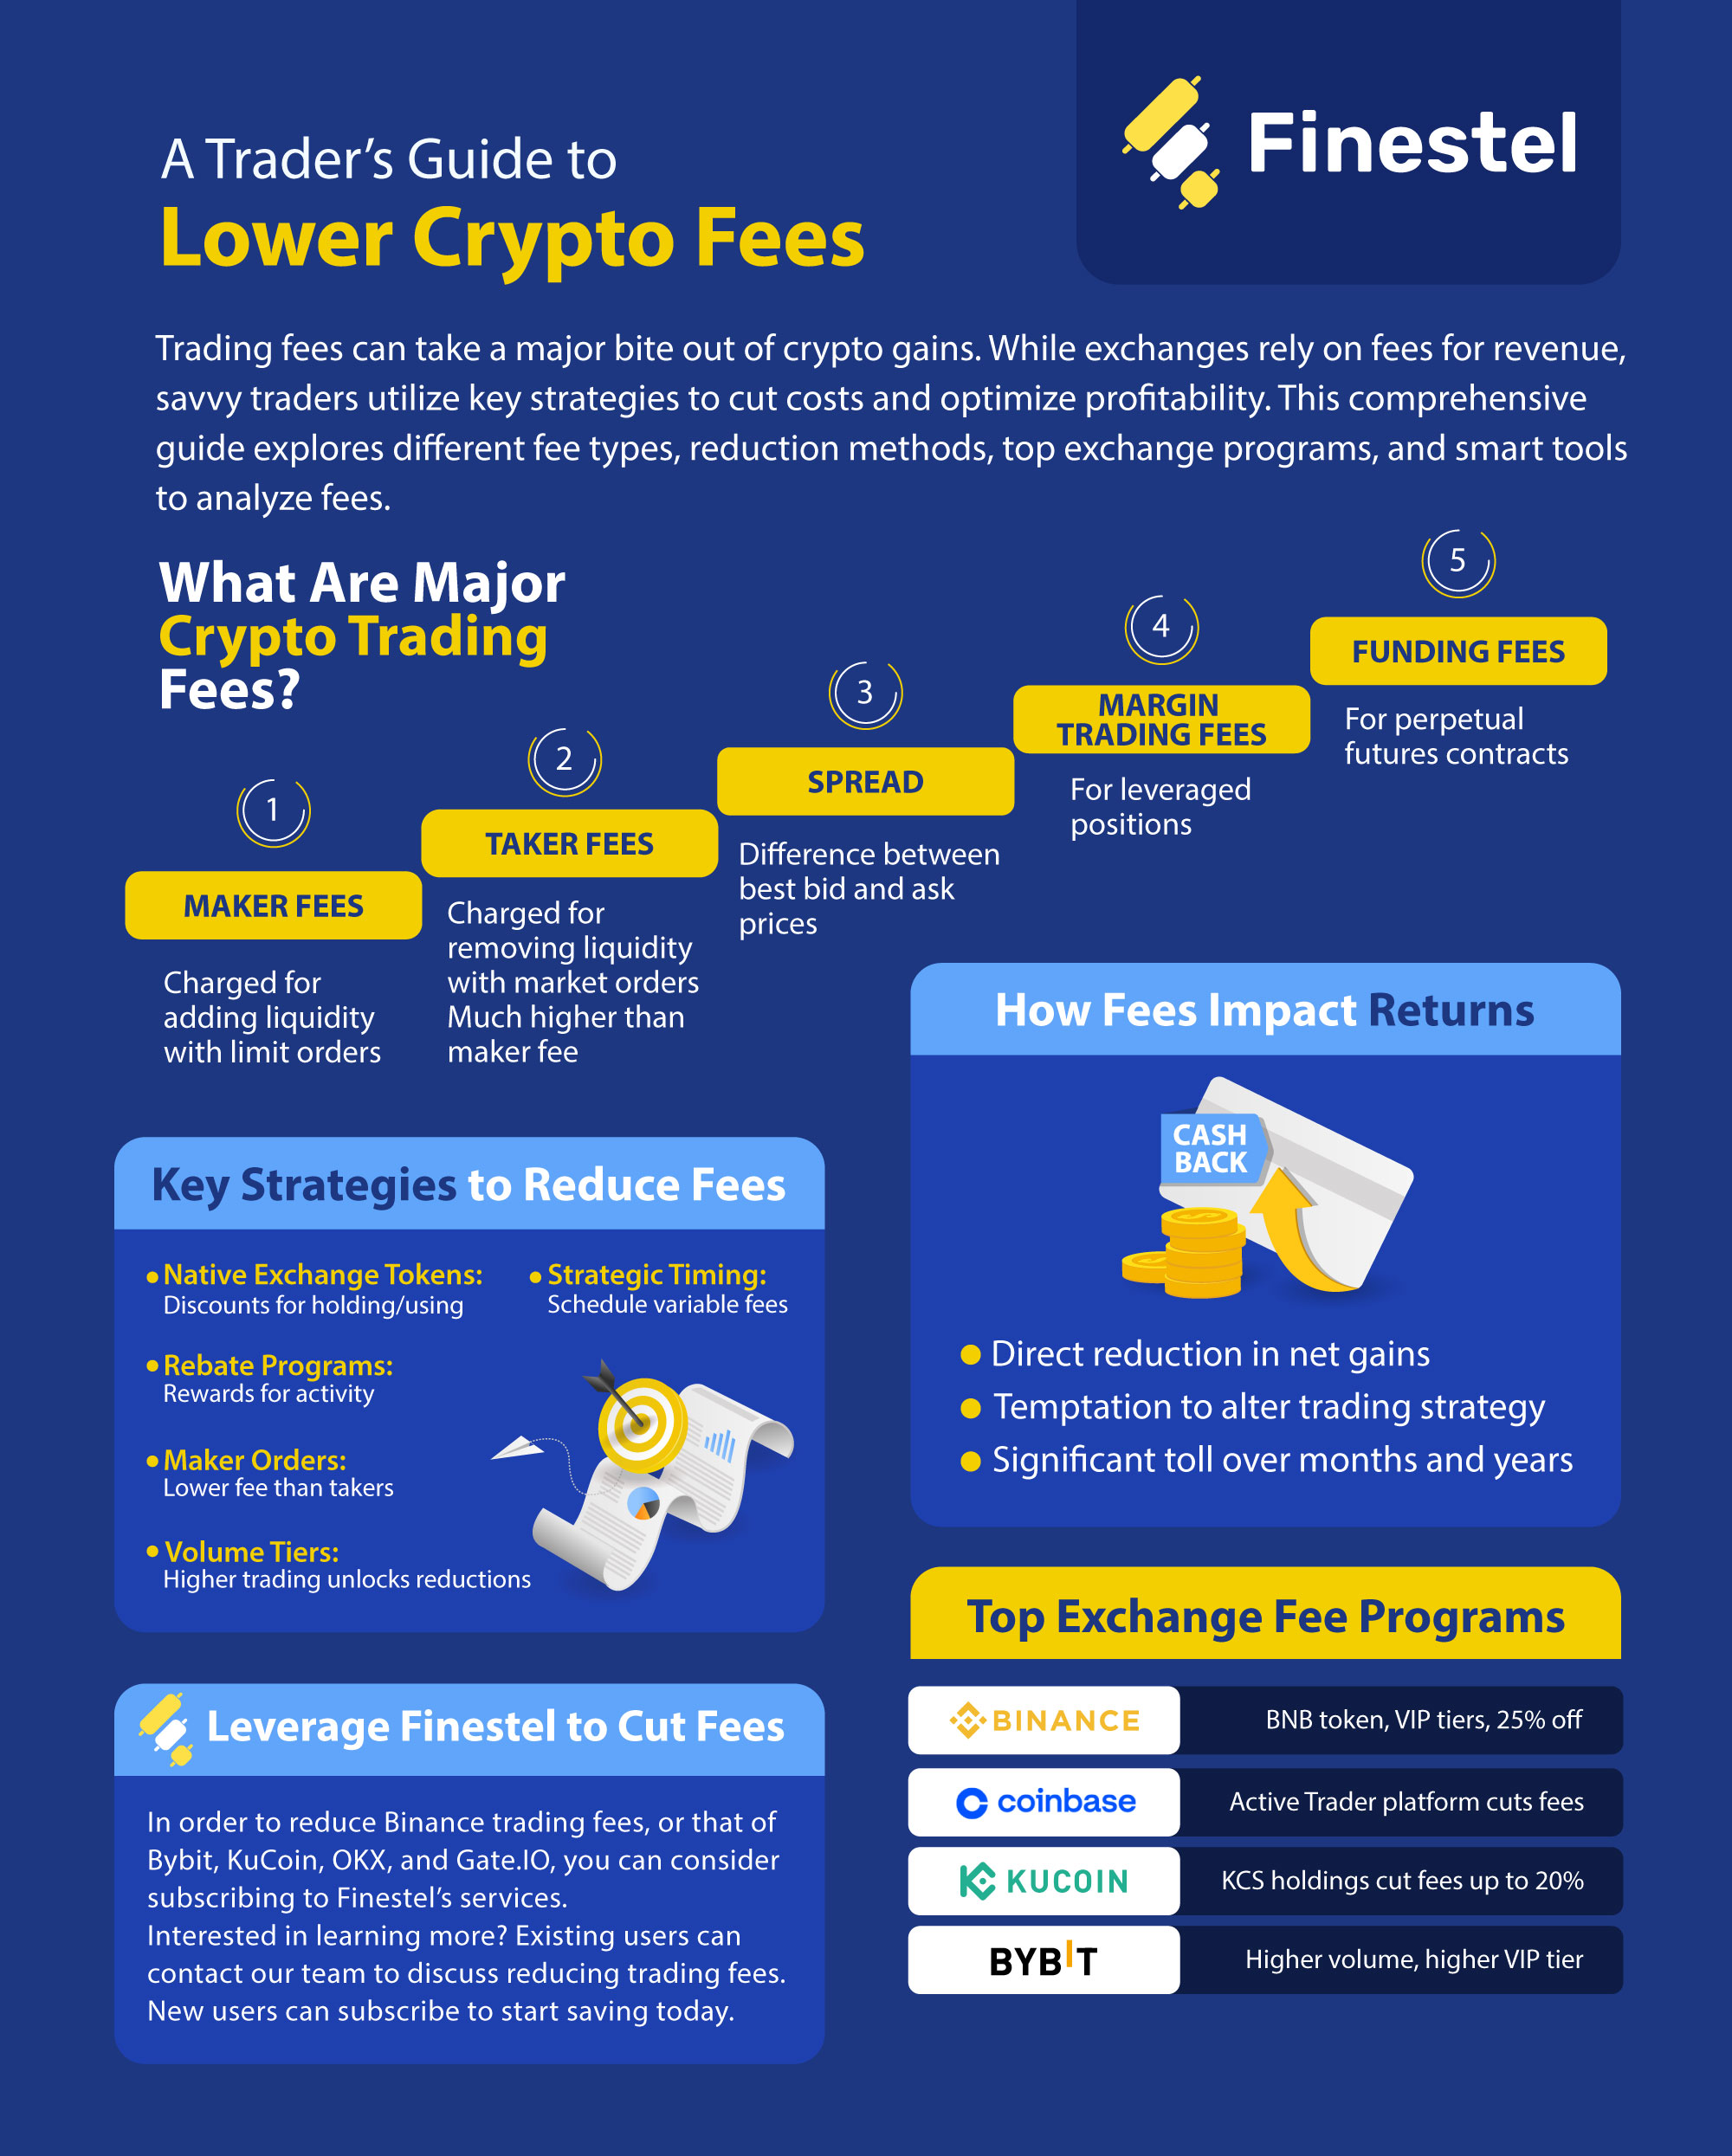 Traders Guide to Lower Crypto Fees Infographic